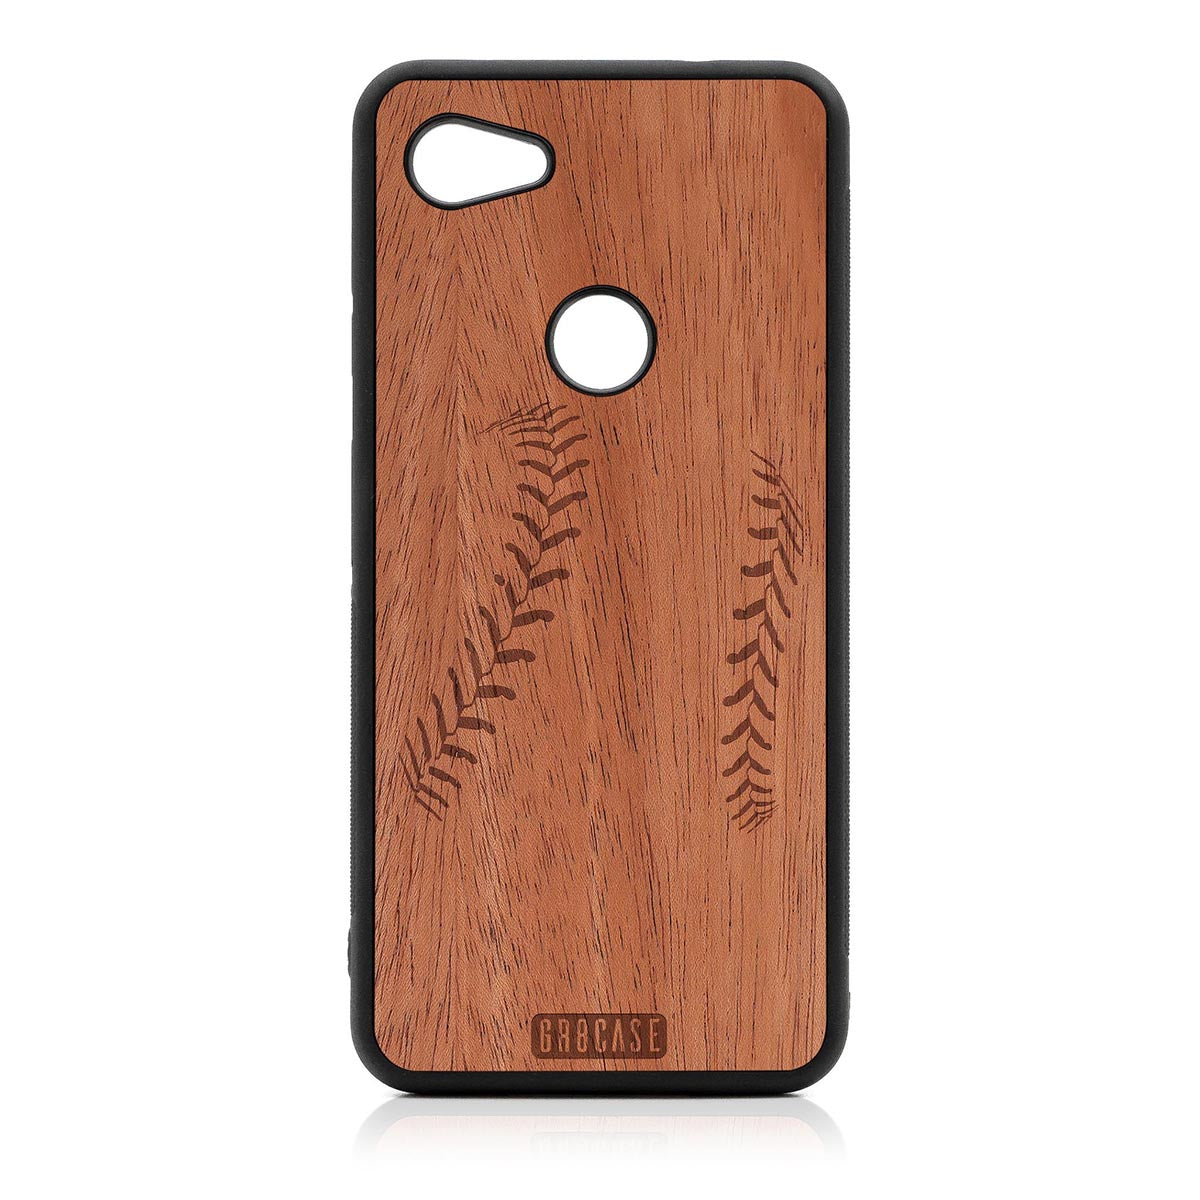 Baseball Stitches Design Wood Case For Google Pixel 3A by GR8CASE